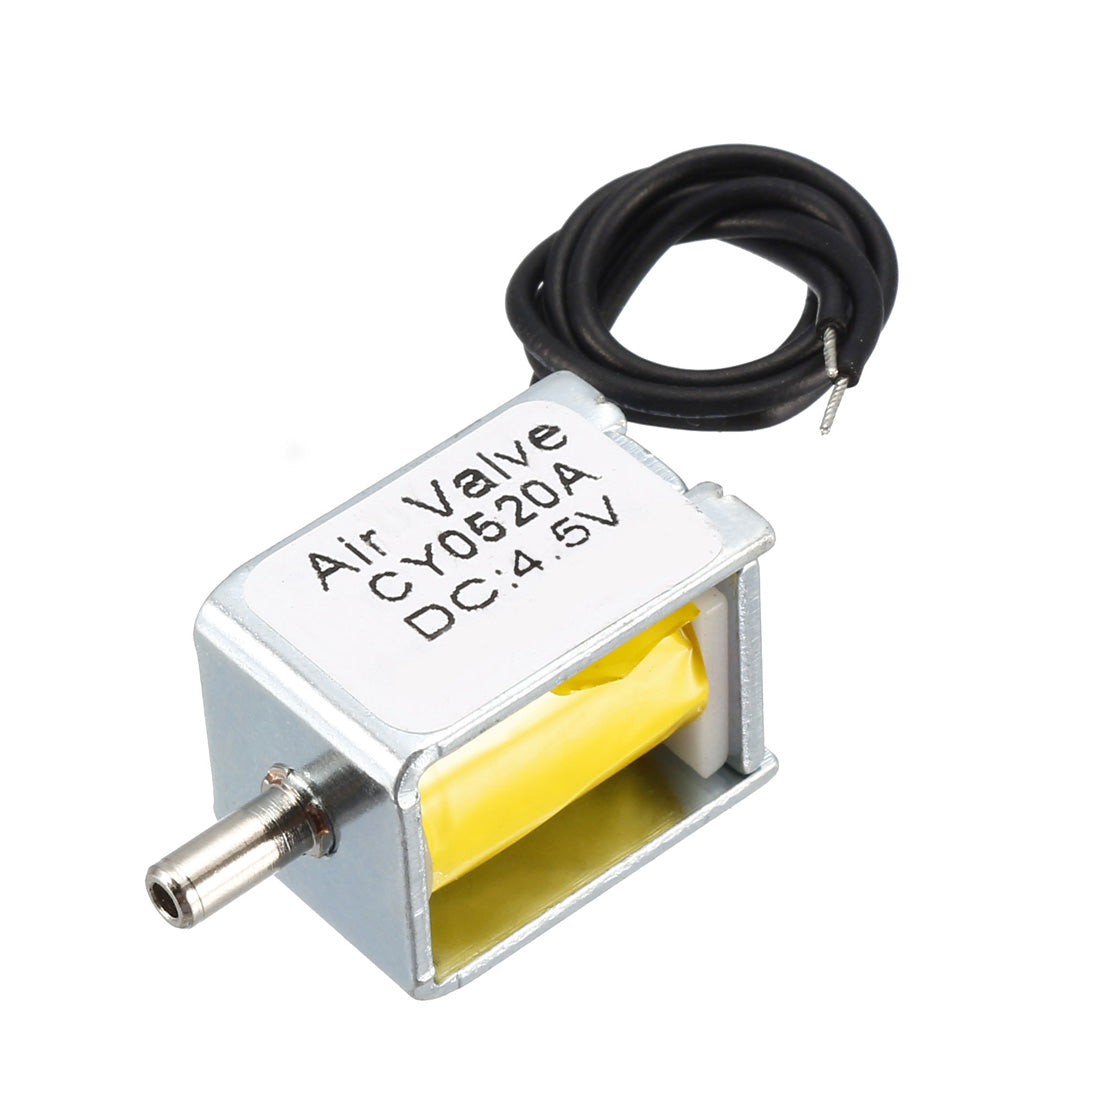 uxcell Uxcell Miniature Solenoid Valve Normally Opened DC4.5V 80mA Air Solenoid Valve